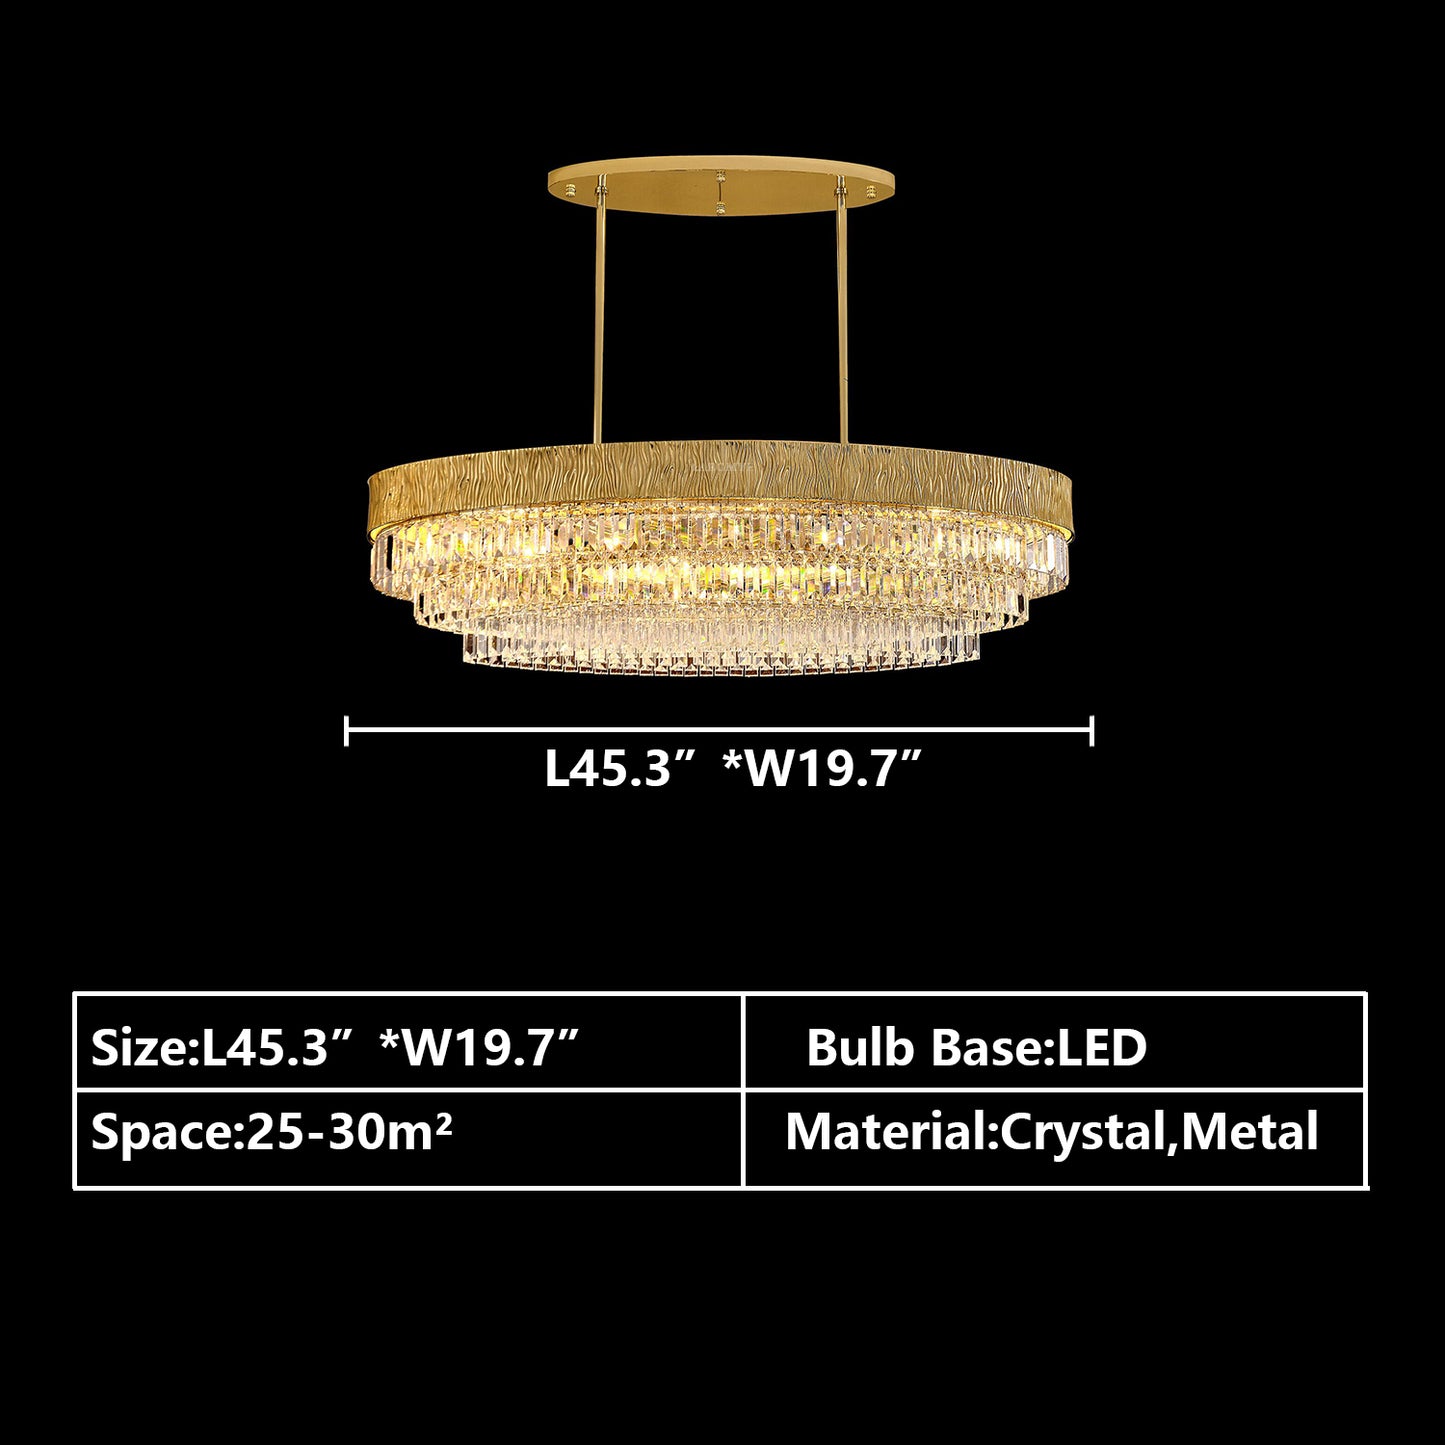 Oval:L45.3"*W19.7" chandelier,chandeliers,light,lamp,pendant,round,oval,tiers,layers,multi-tier,multi-layer,gold,luxury,light luxury,ceiling,chain,crystal,metal,living room,dining room,bedroom,dining table,bar,hallway